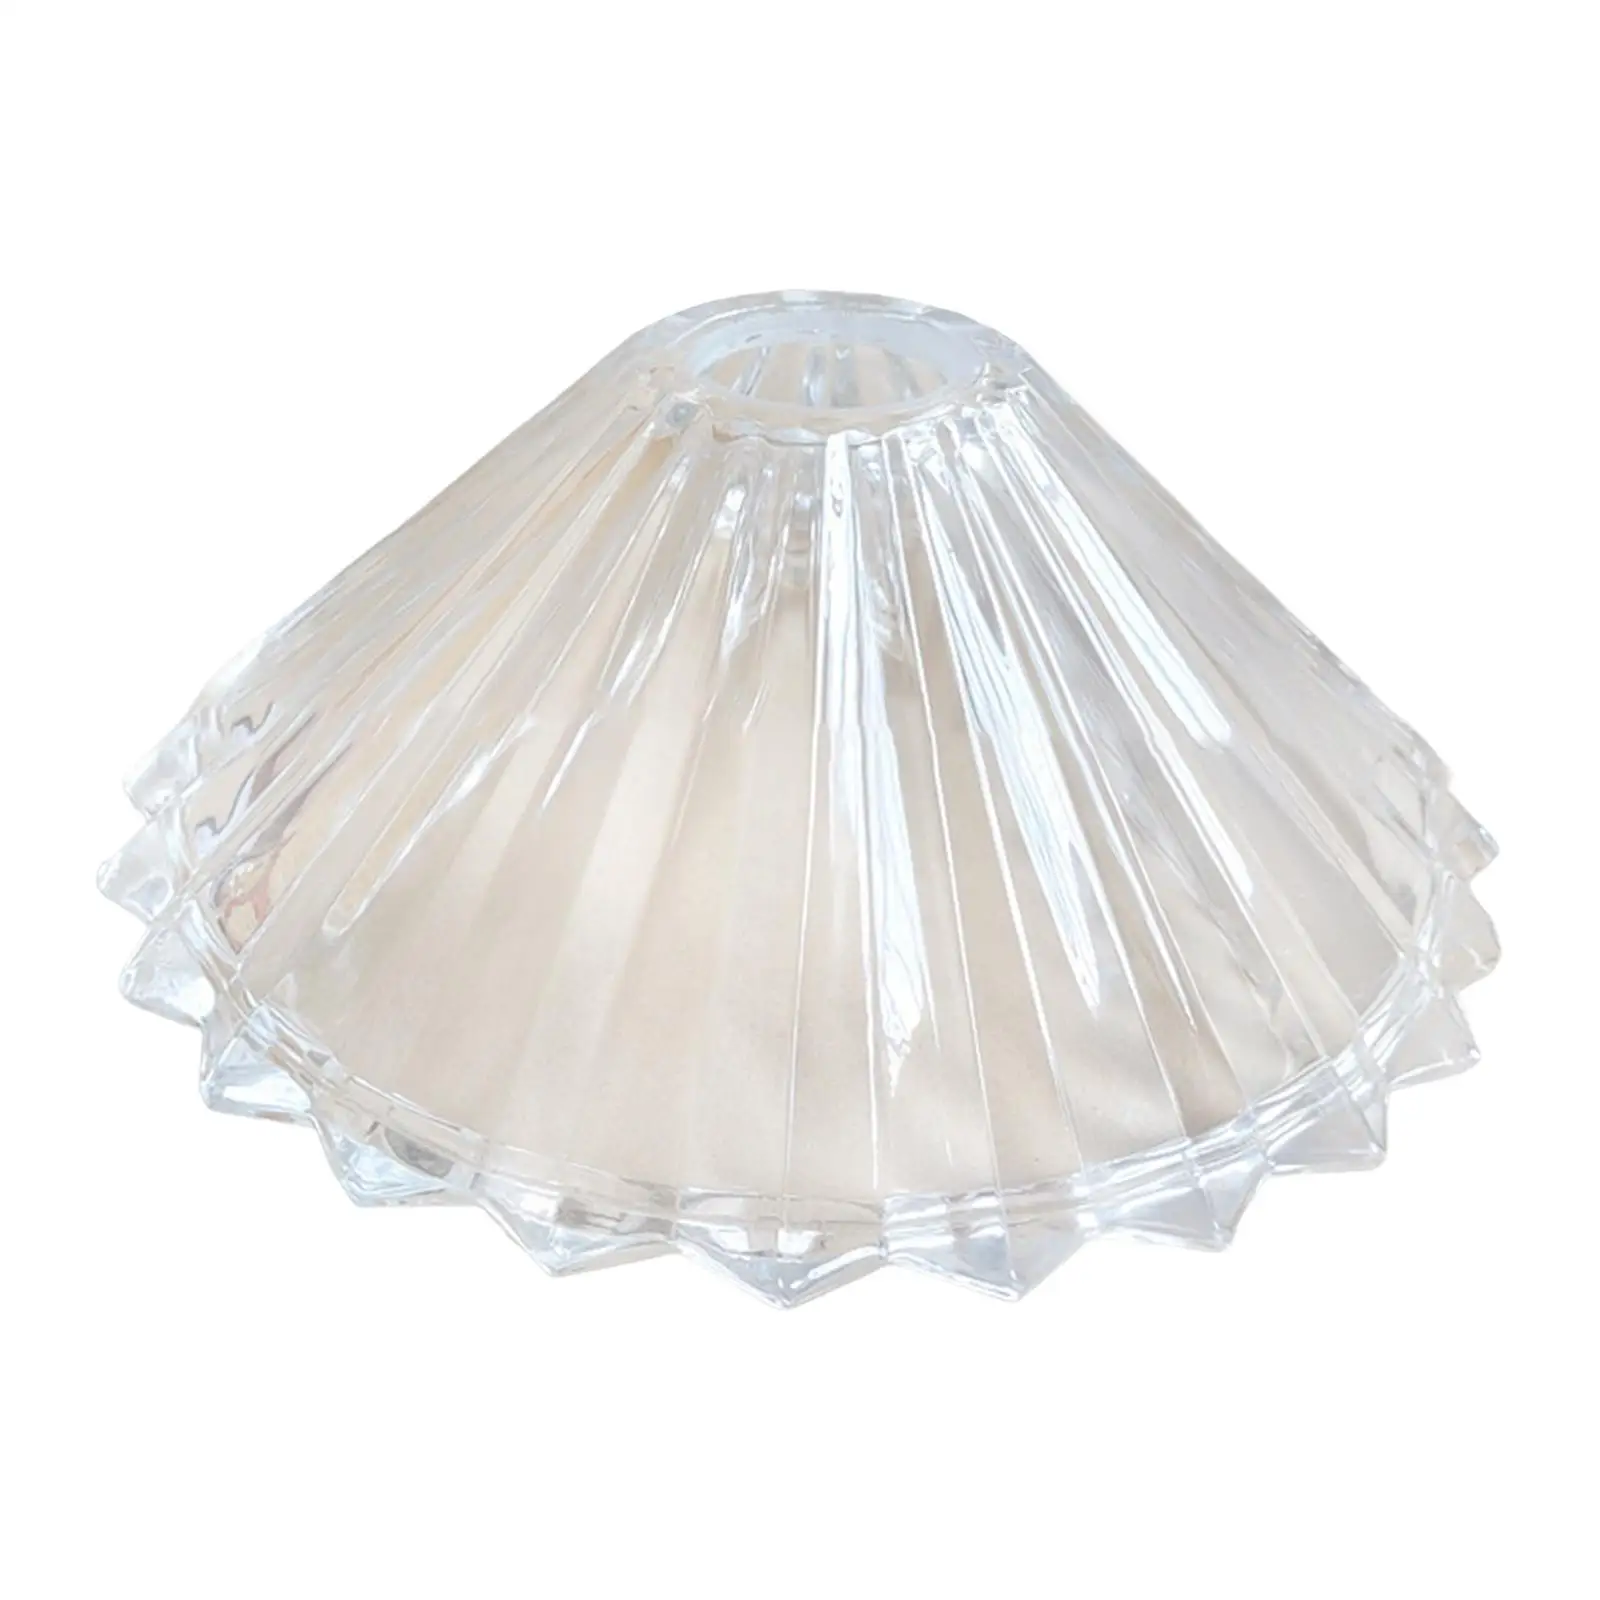 Minimalist Crystal Lamp Shade Cover Durable Transparent Glass Lights Covers for Living Room